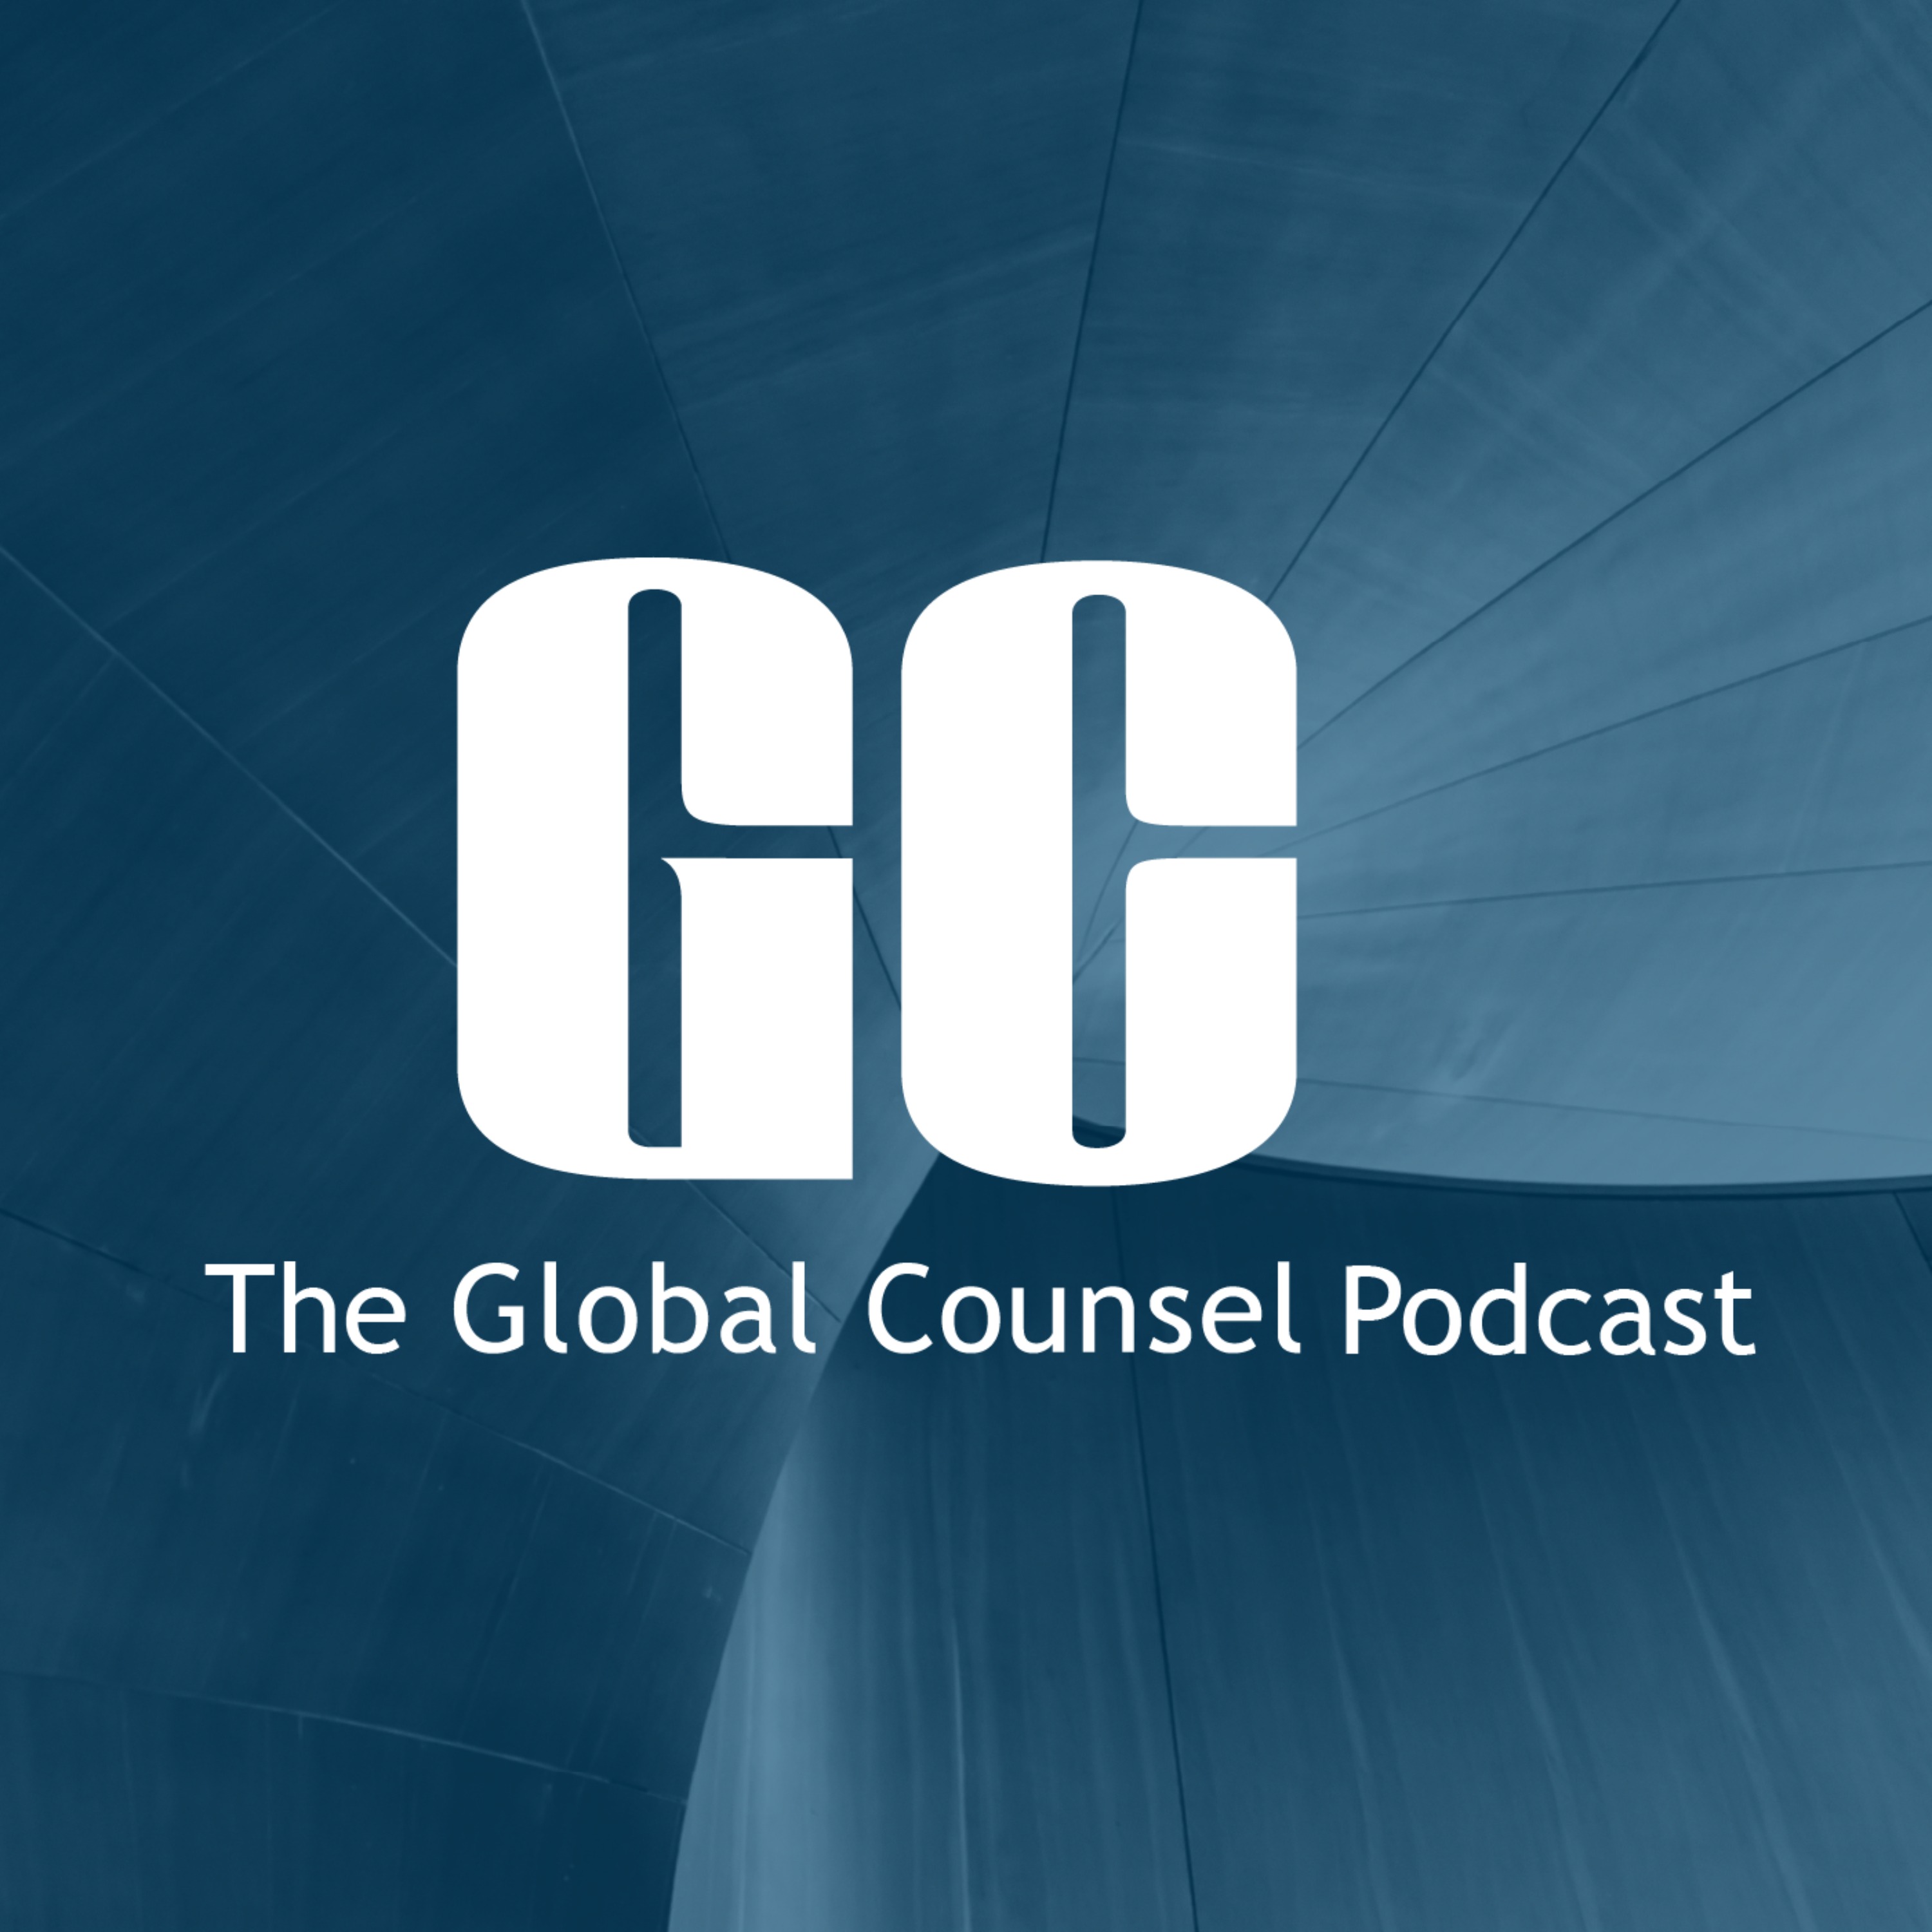 The Global Counsel Podcast